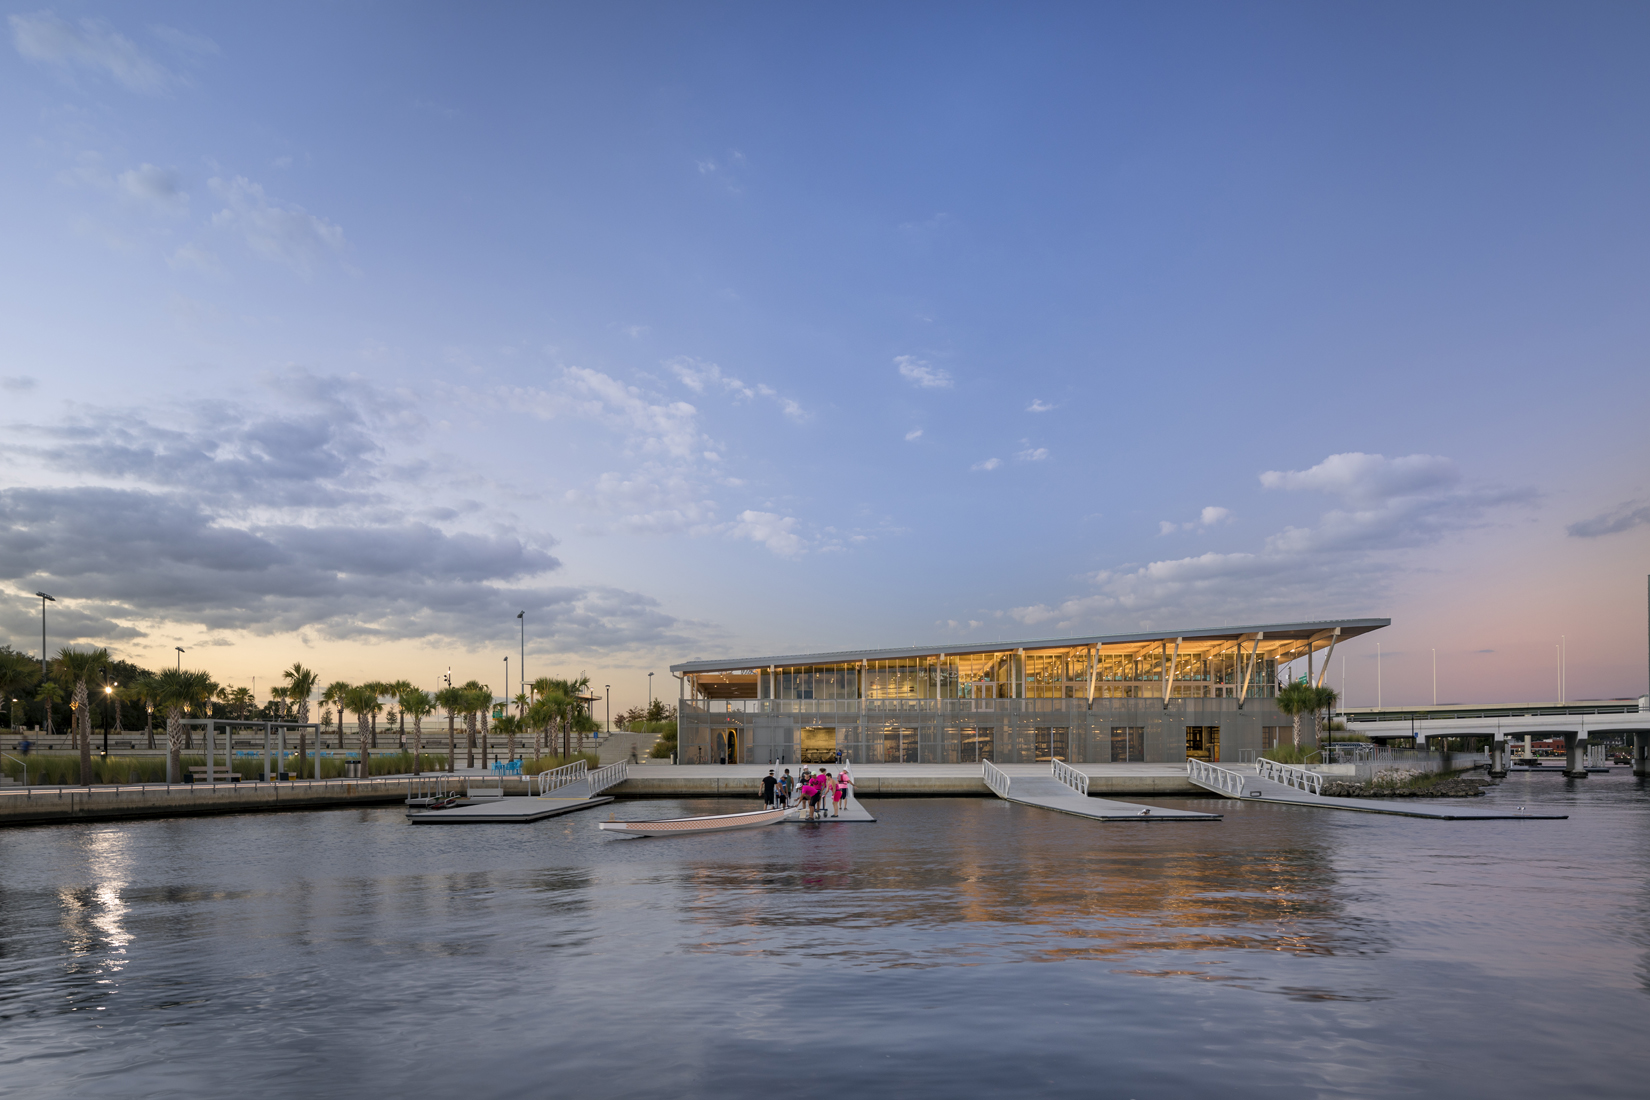 The Julian B. Lane Riverfront Park River Center designed by W Architecture and Landscape Architecture includes city boat rentals for paddling instruction, a community center and public art.